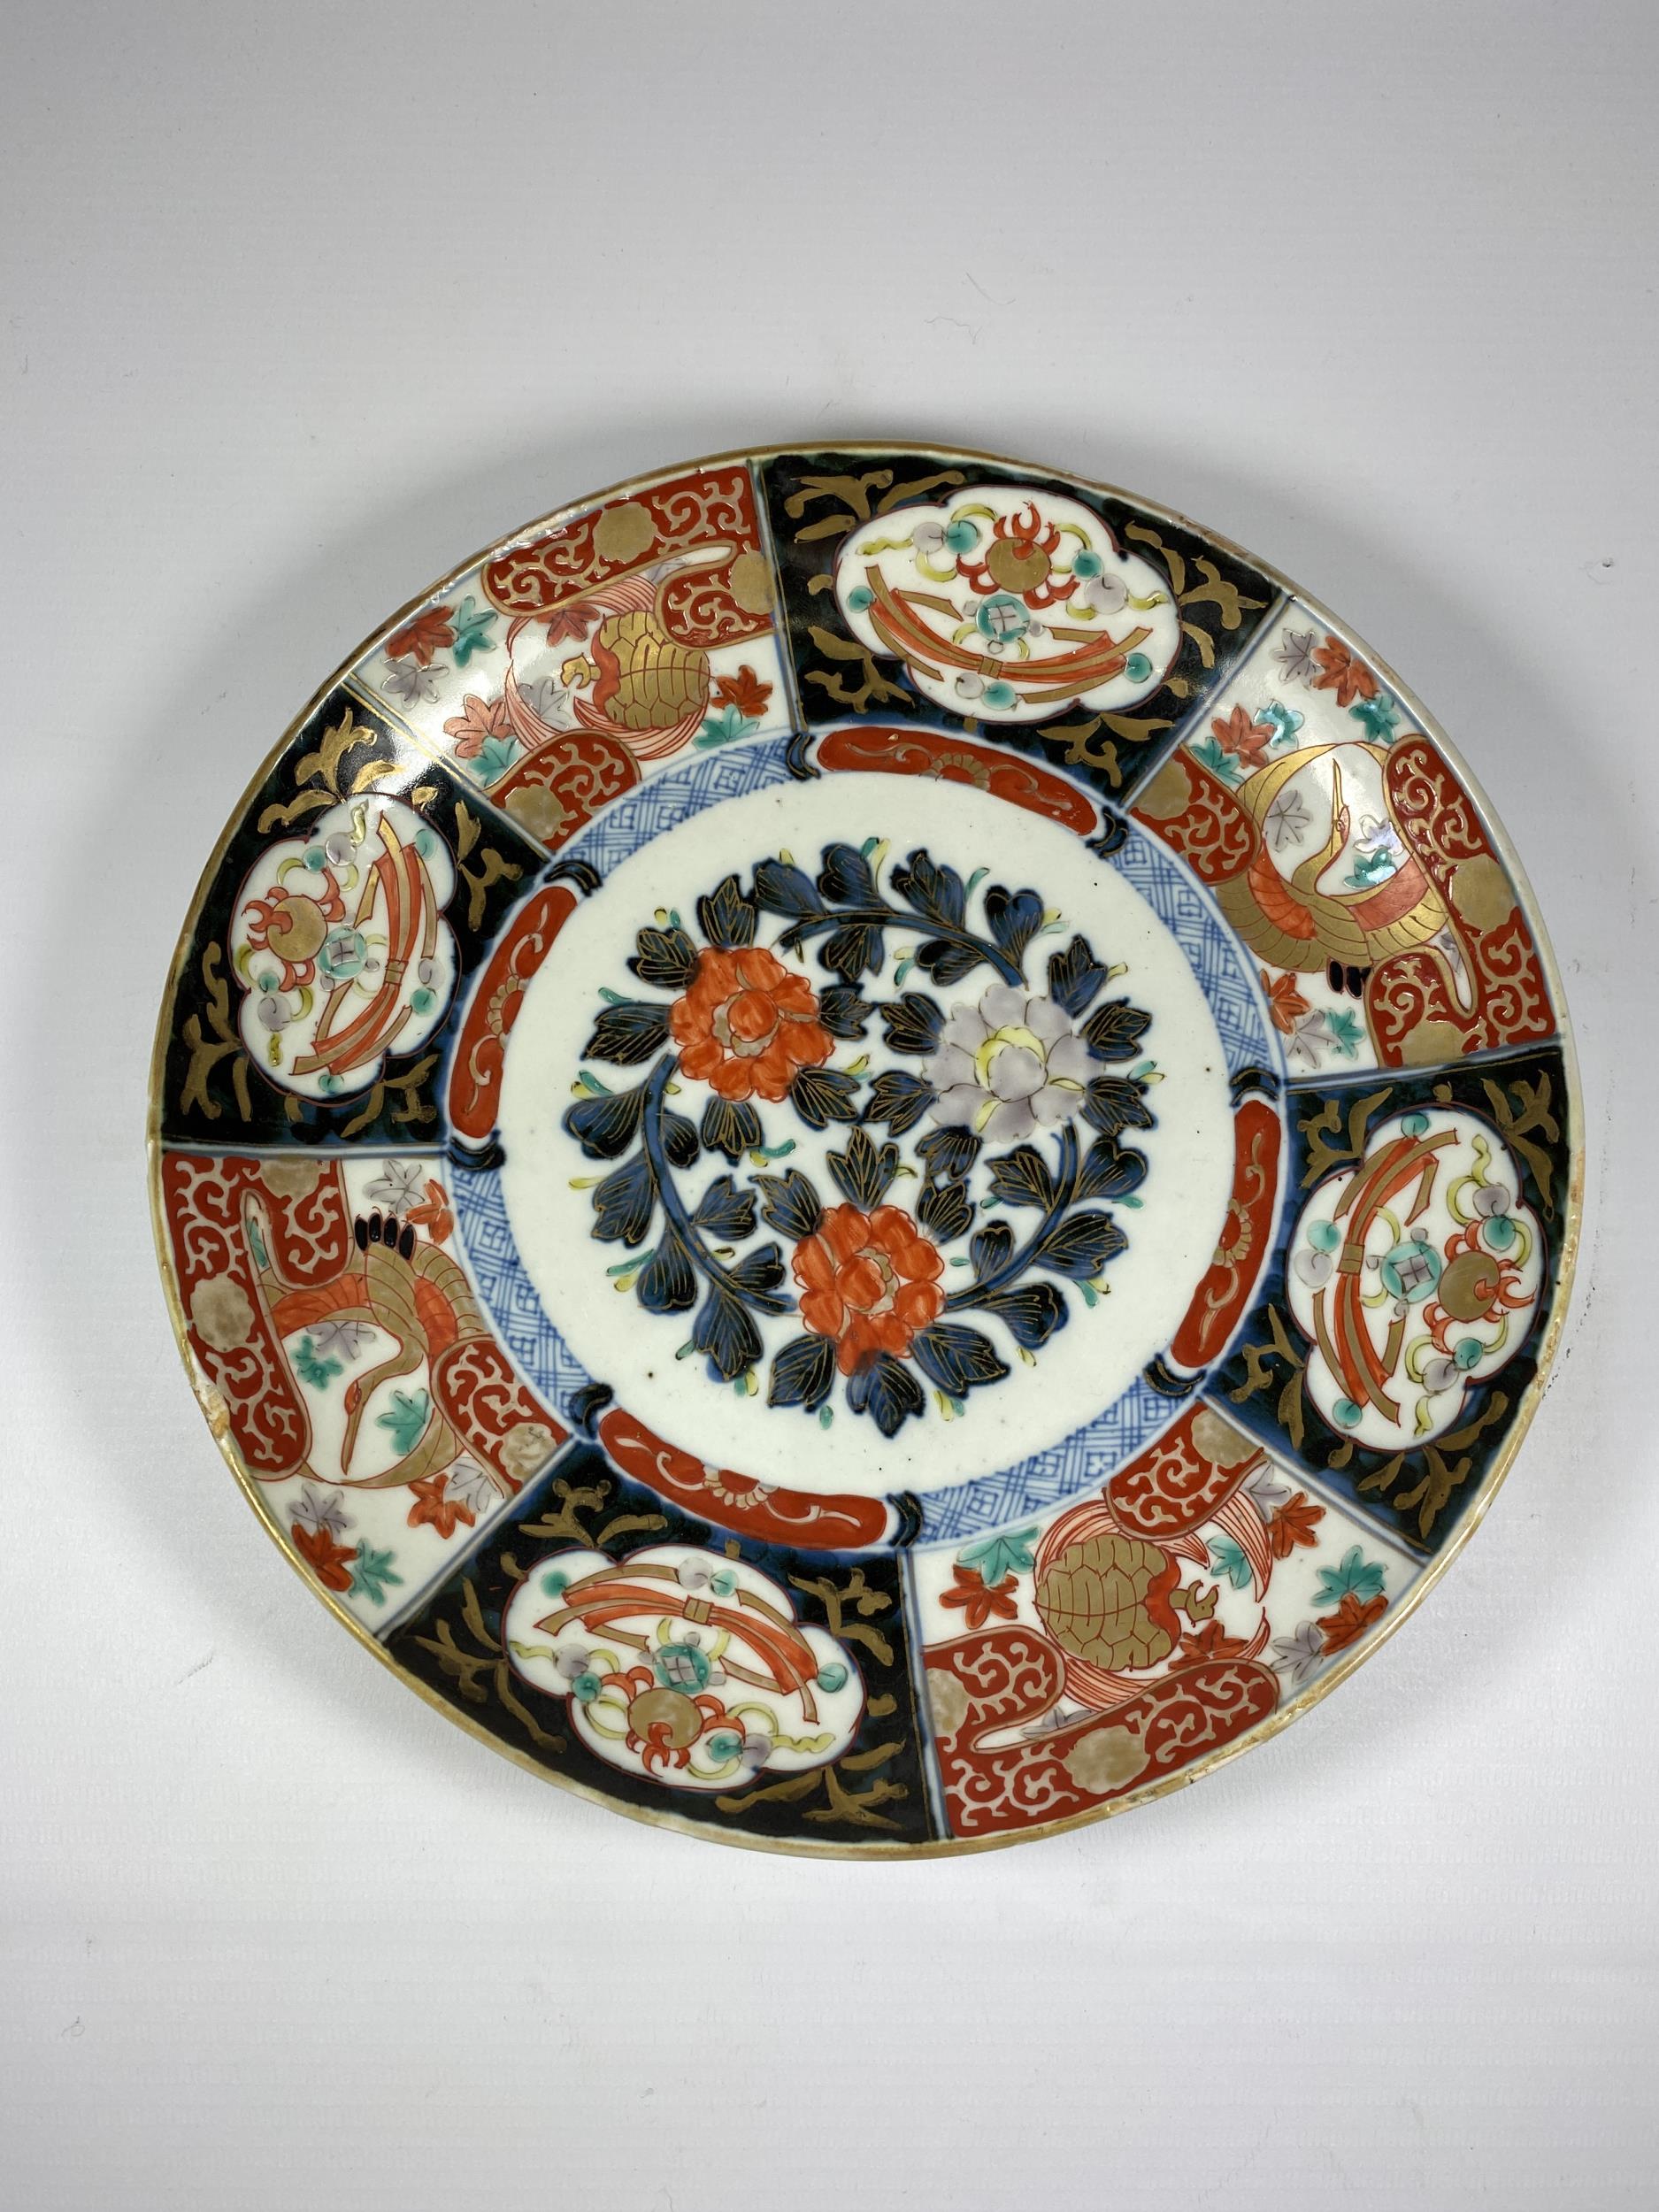 A JAPANESE MEIJI PERIOD (1868-1912) HAND PAINTED CHARGER, DIAMETER 25CM